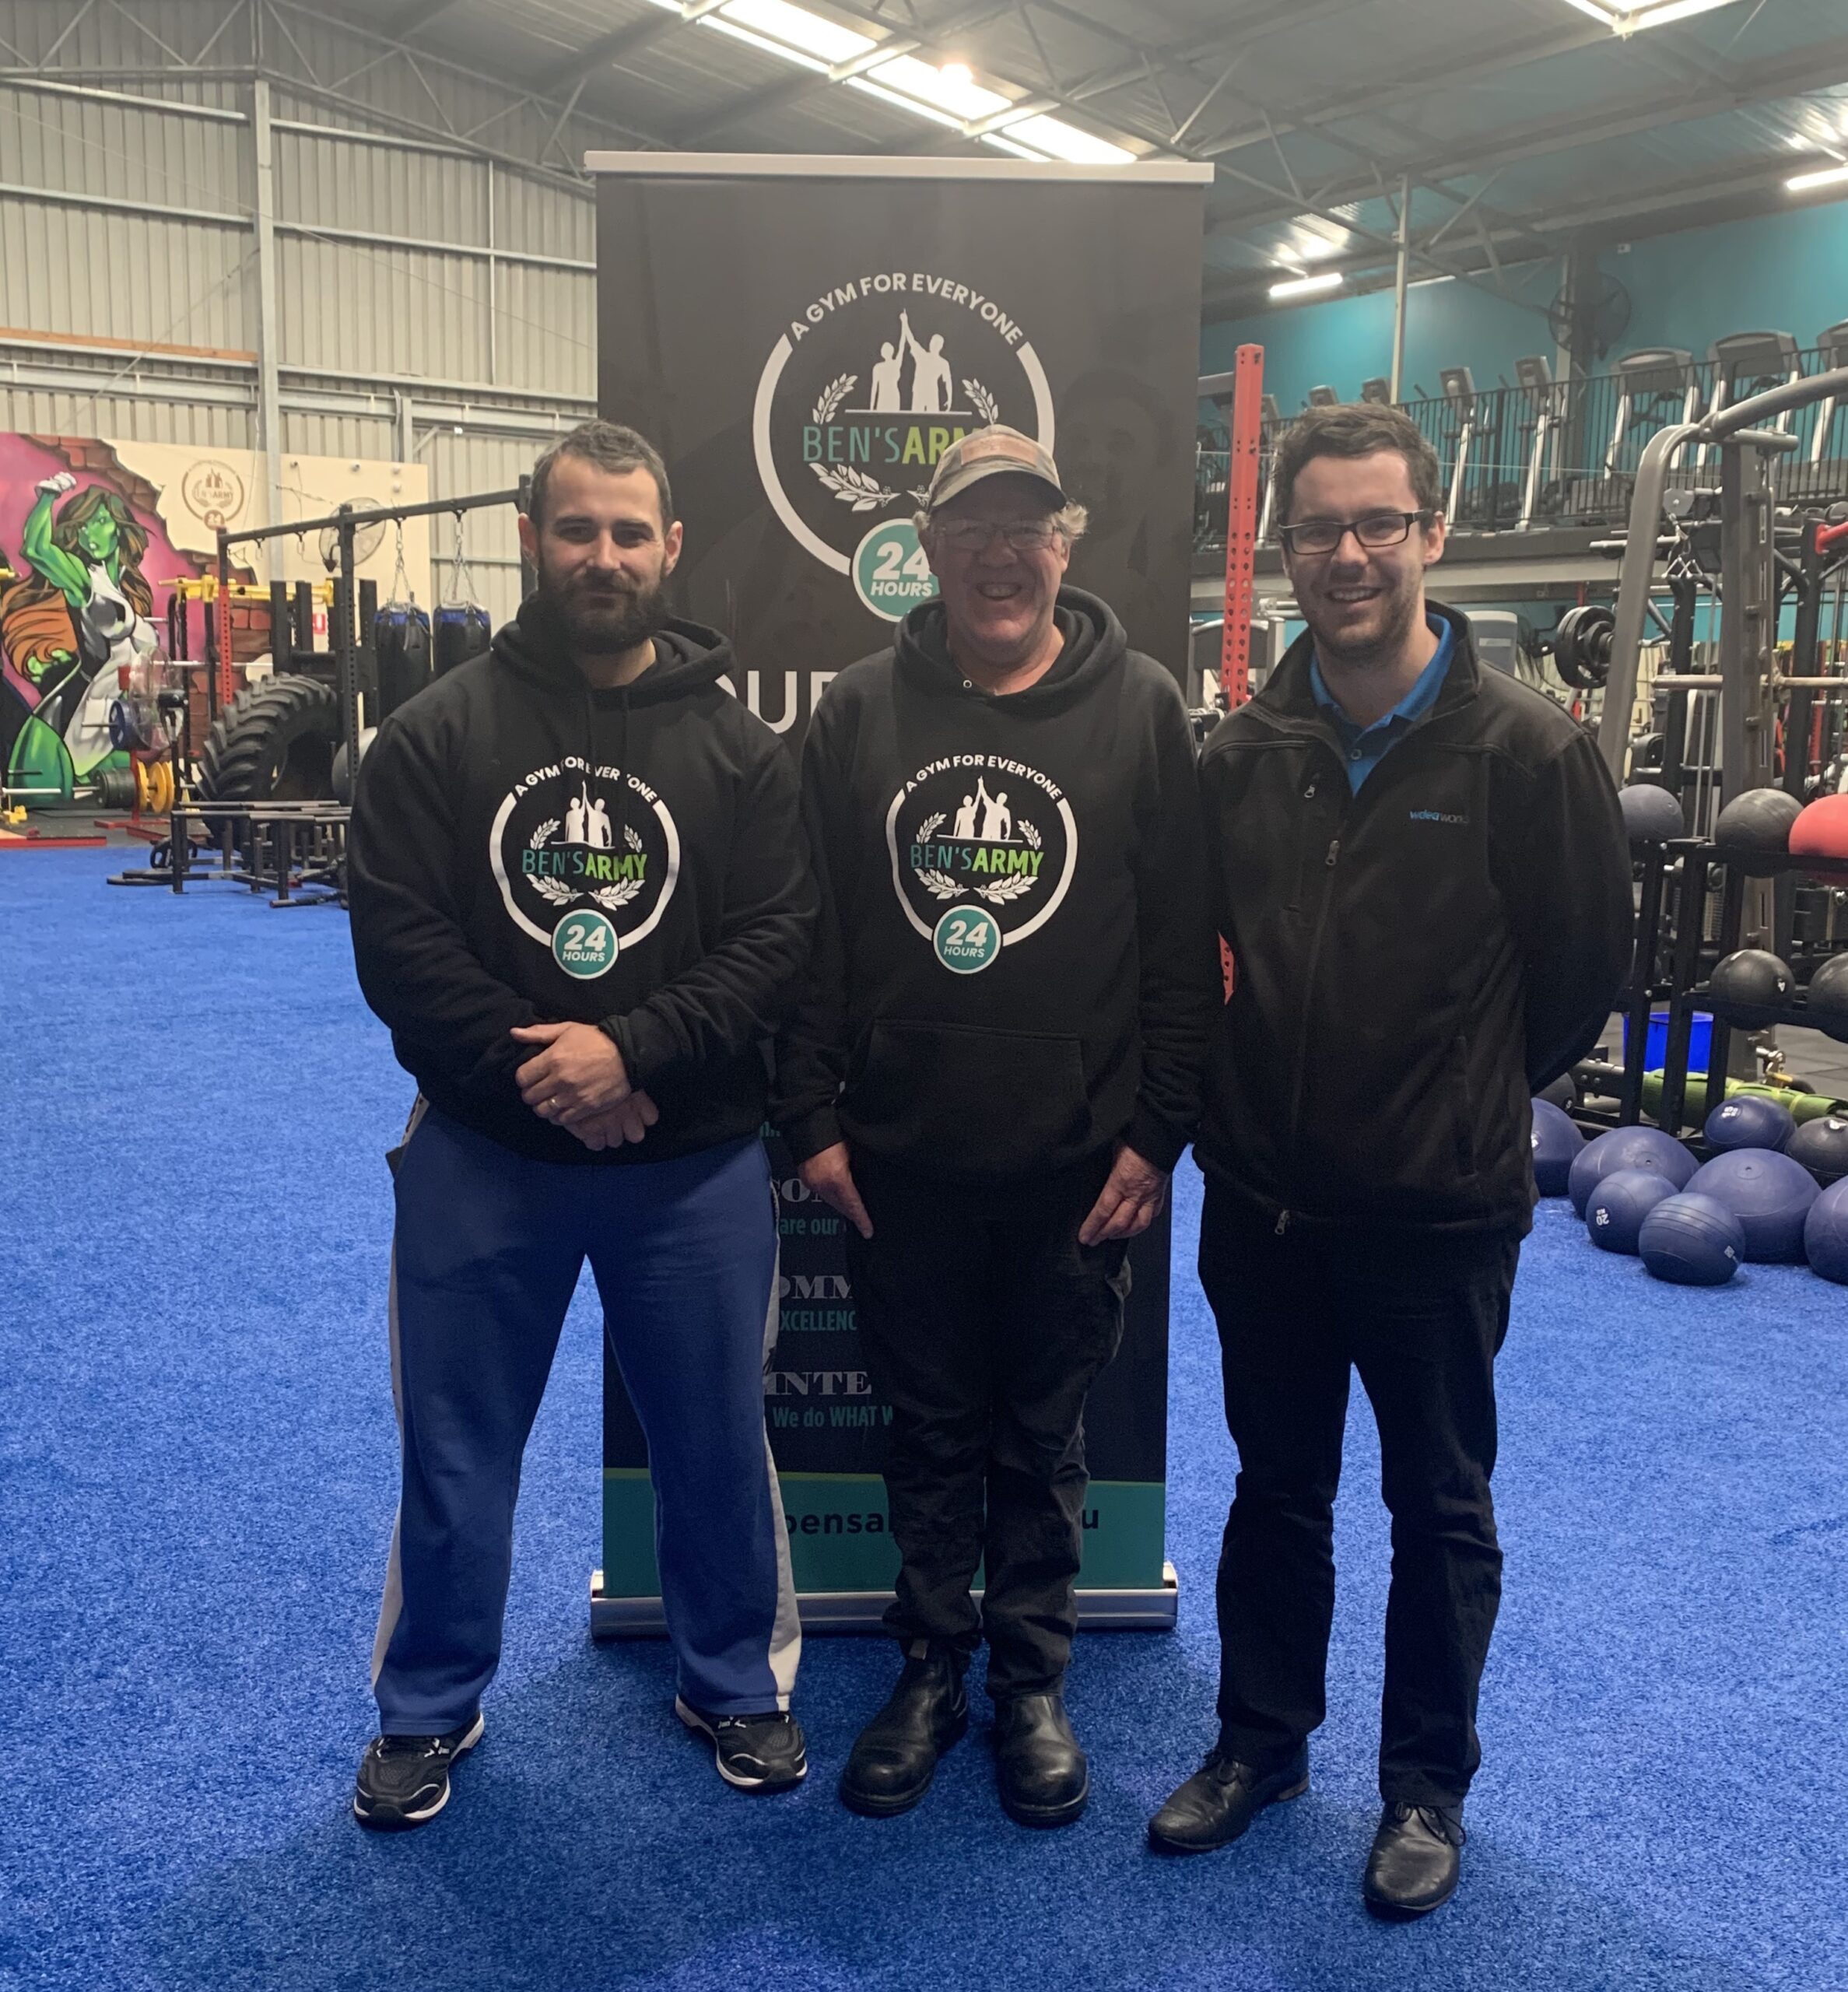 Ballarat Gym Ben’s Army Provides the Perfect Workplace for WDEA Works Client Robert